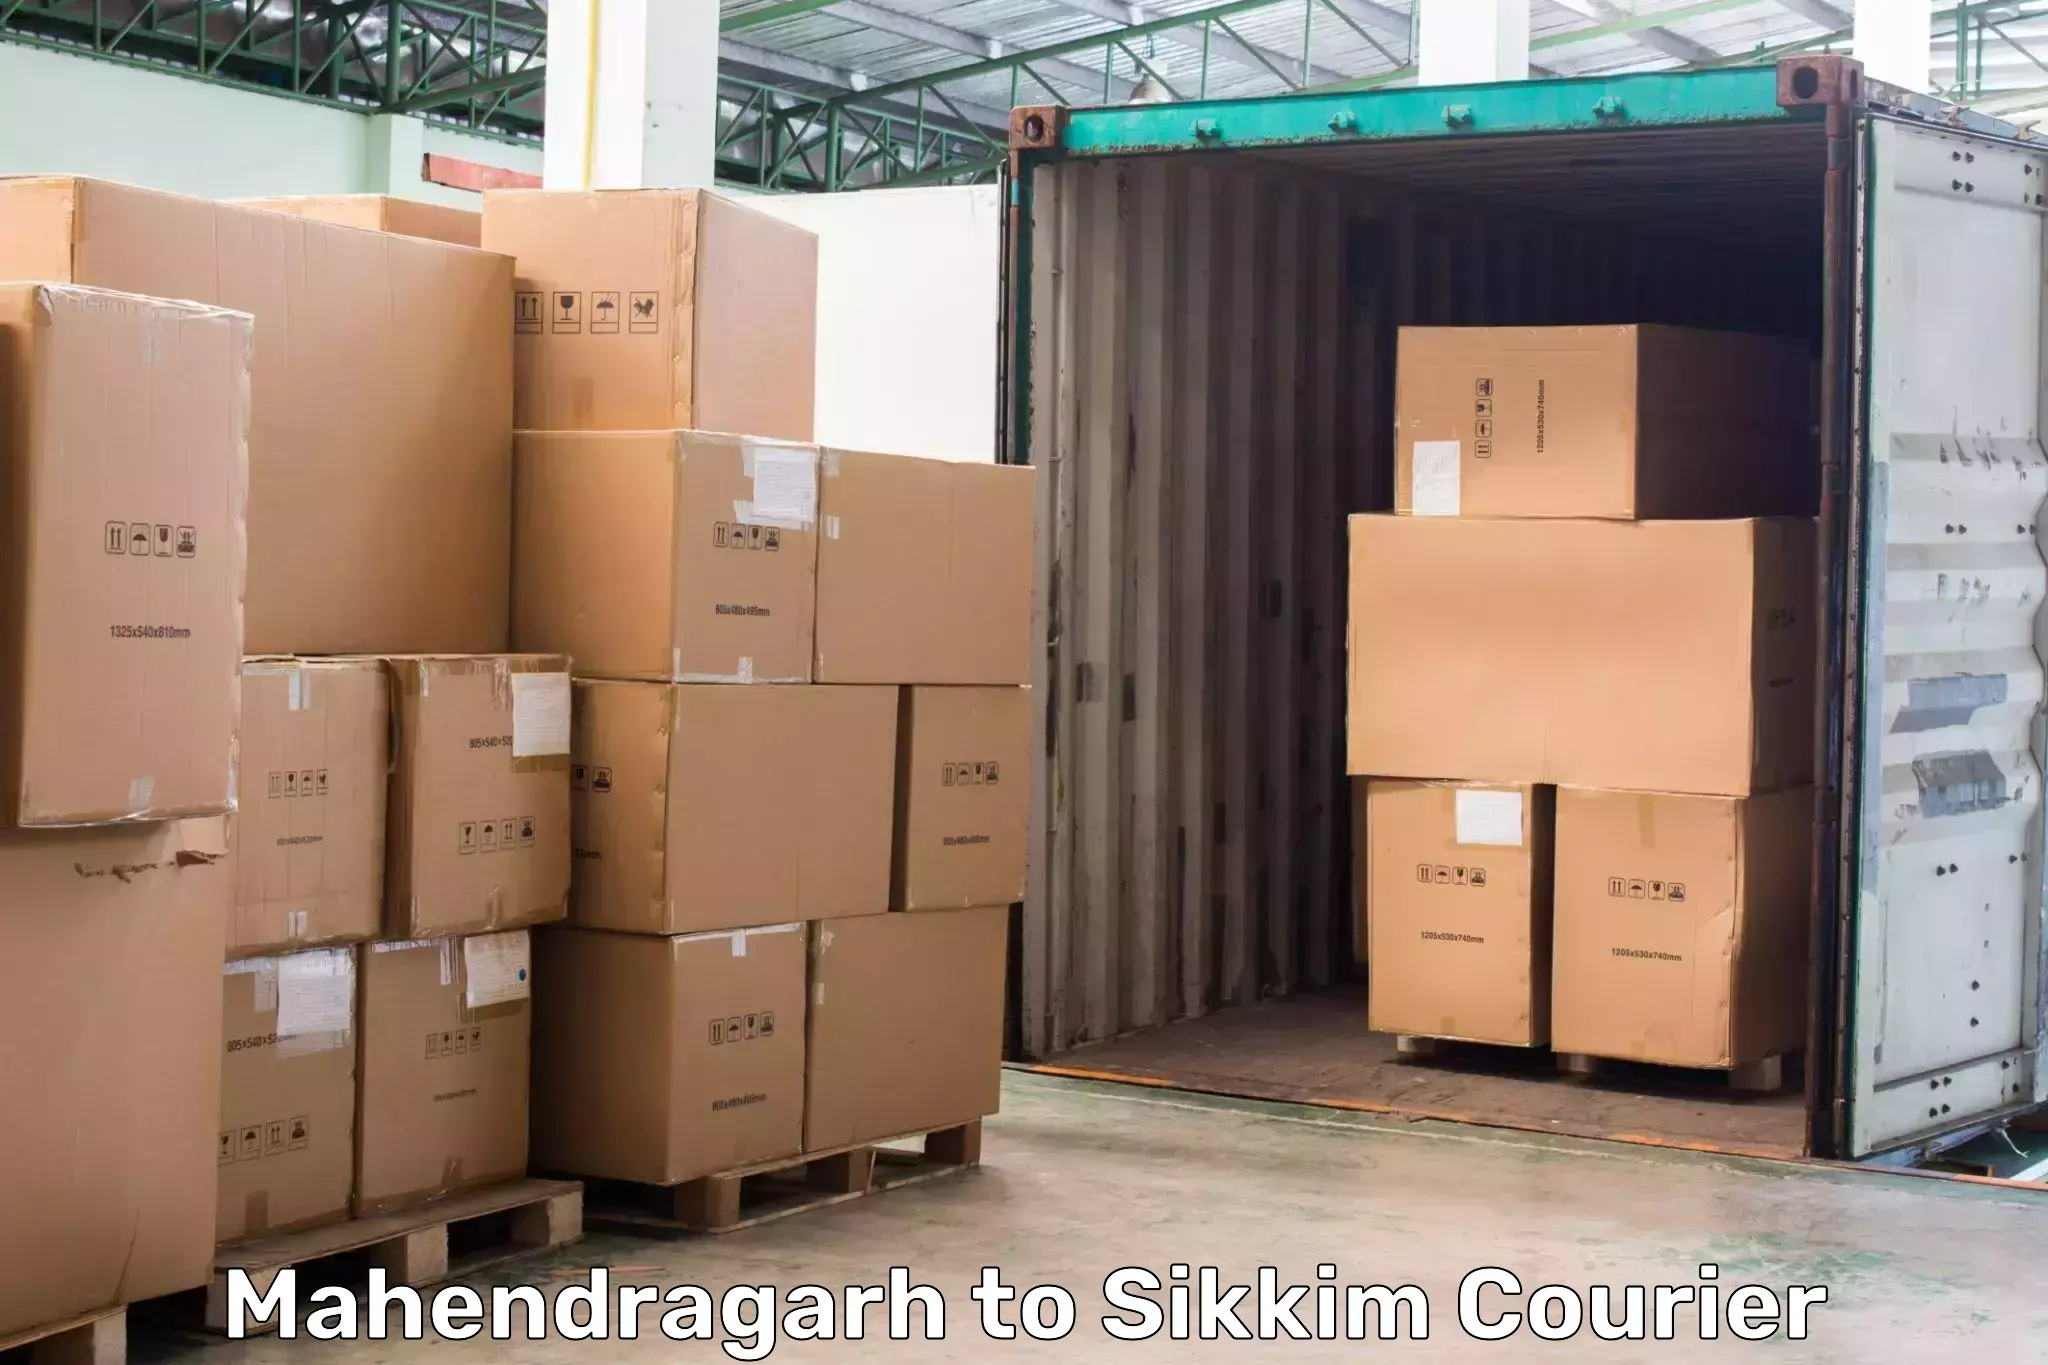 Global shipping networks Mahendragarh to West Sikkim